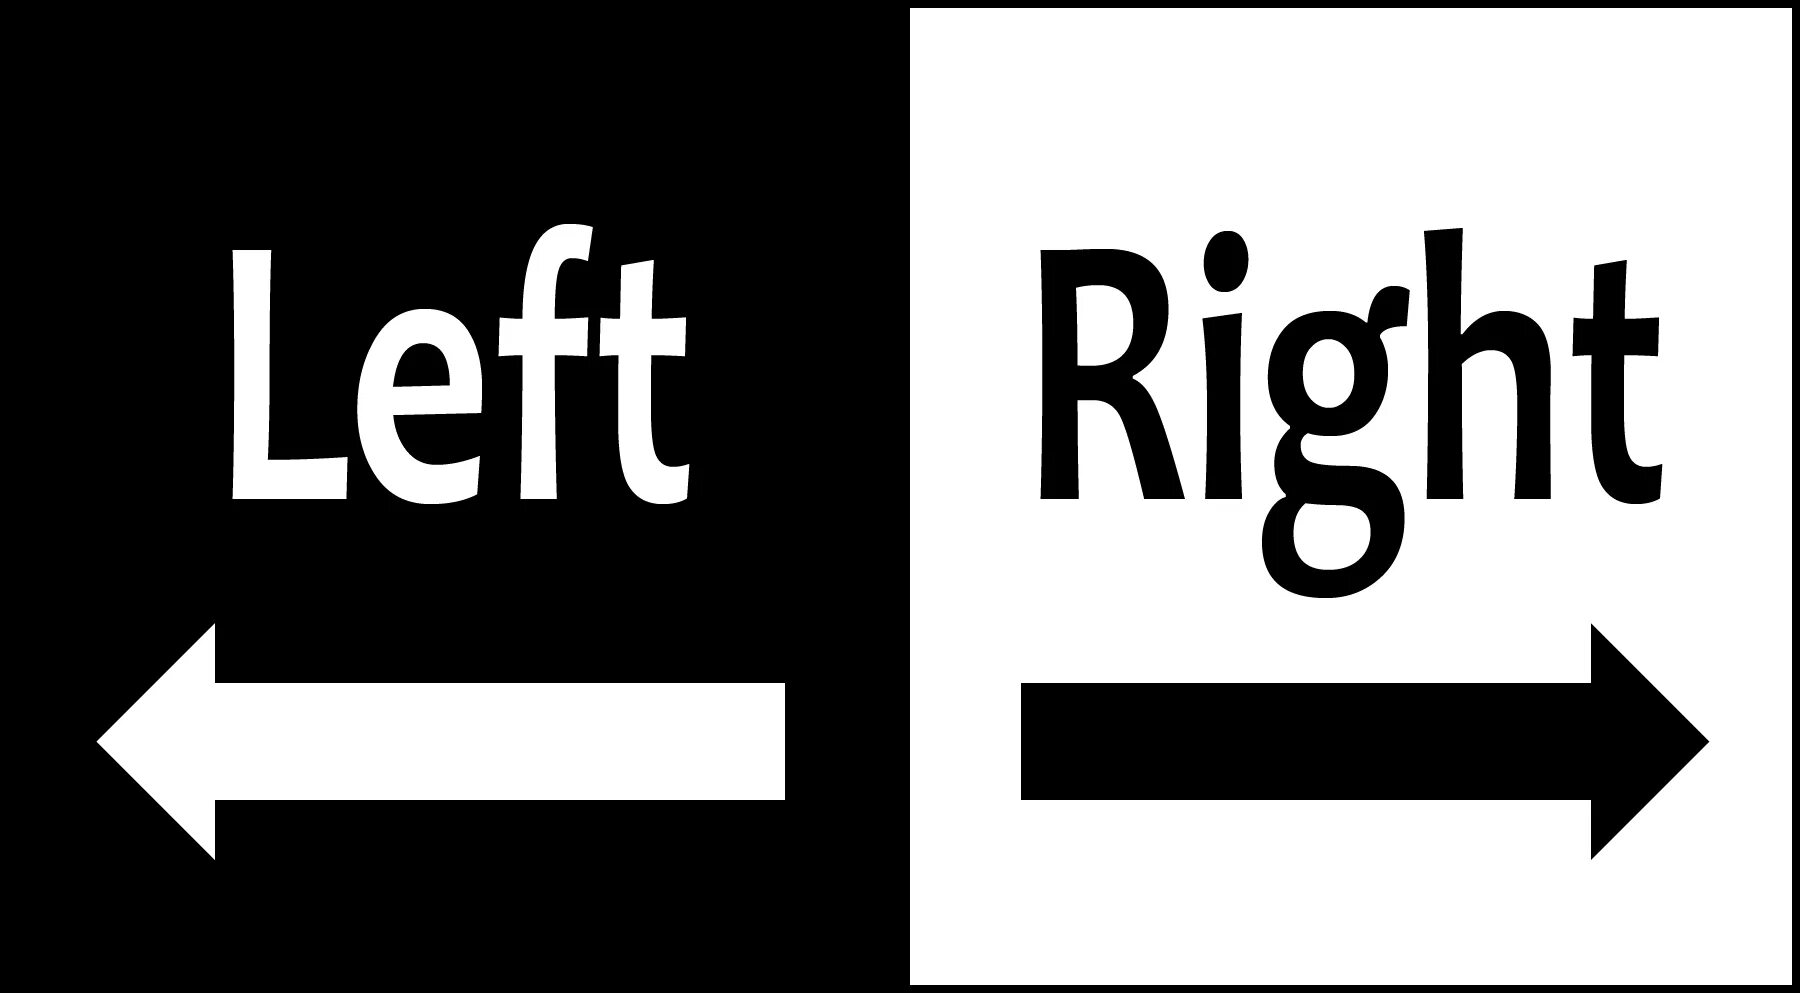 Left active. Left right. The left rights the left rights. Right картинки. Картинка left right.